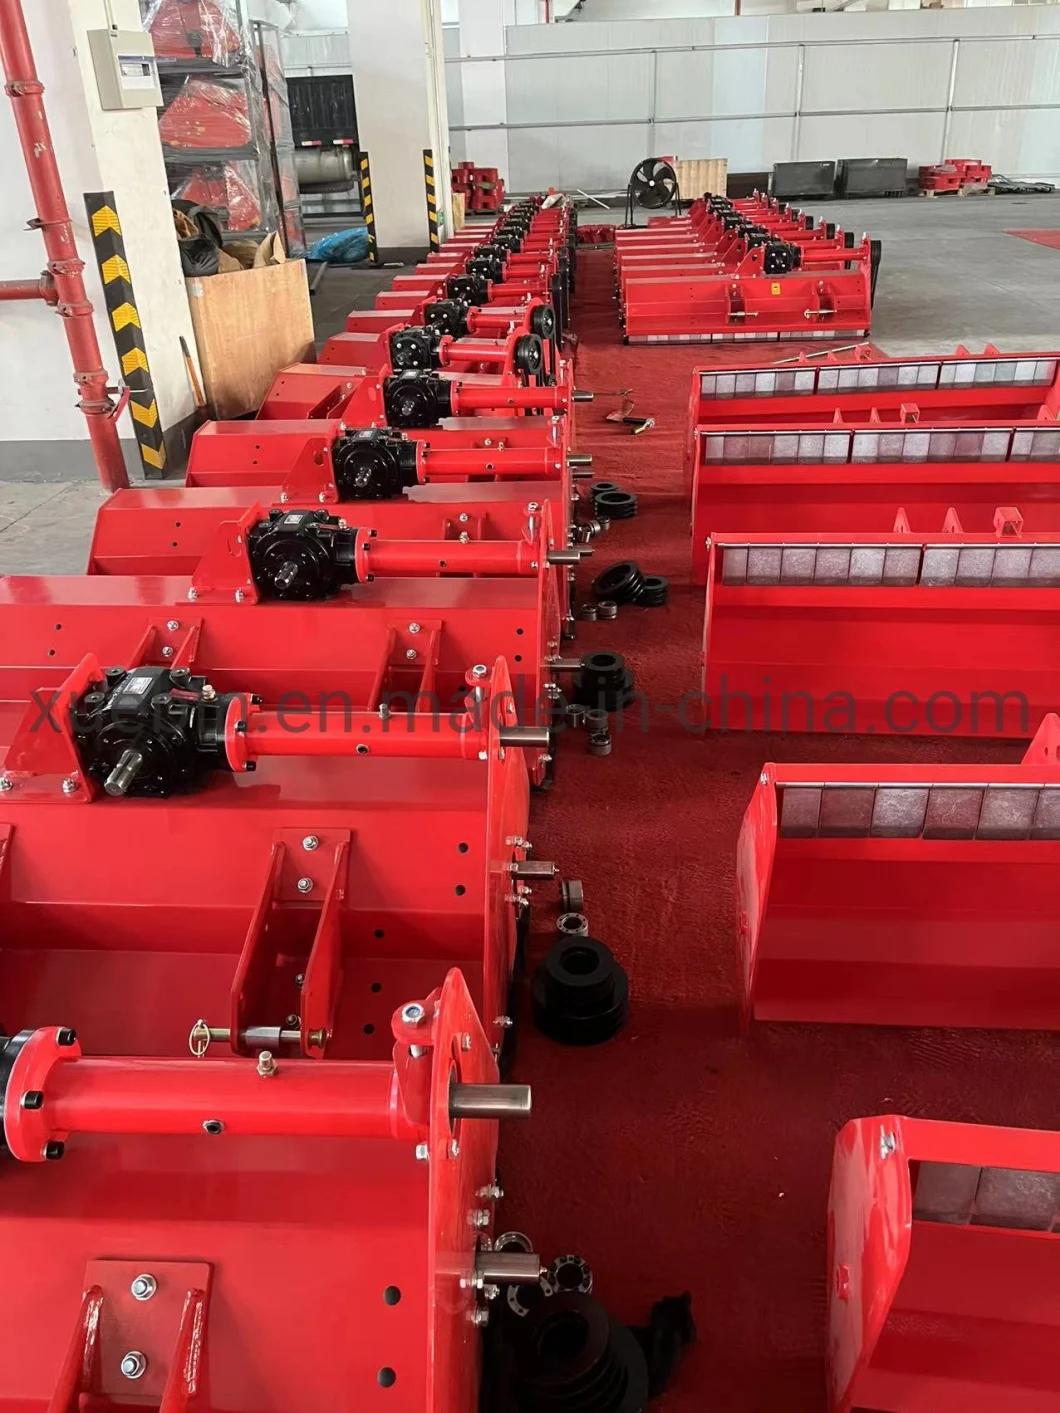 Hydraulic Sideshift Verge Flail Mower for Hot Sale